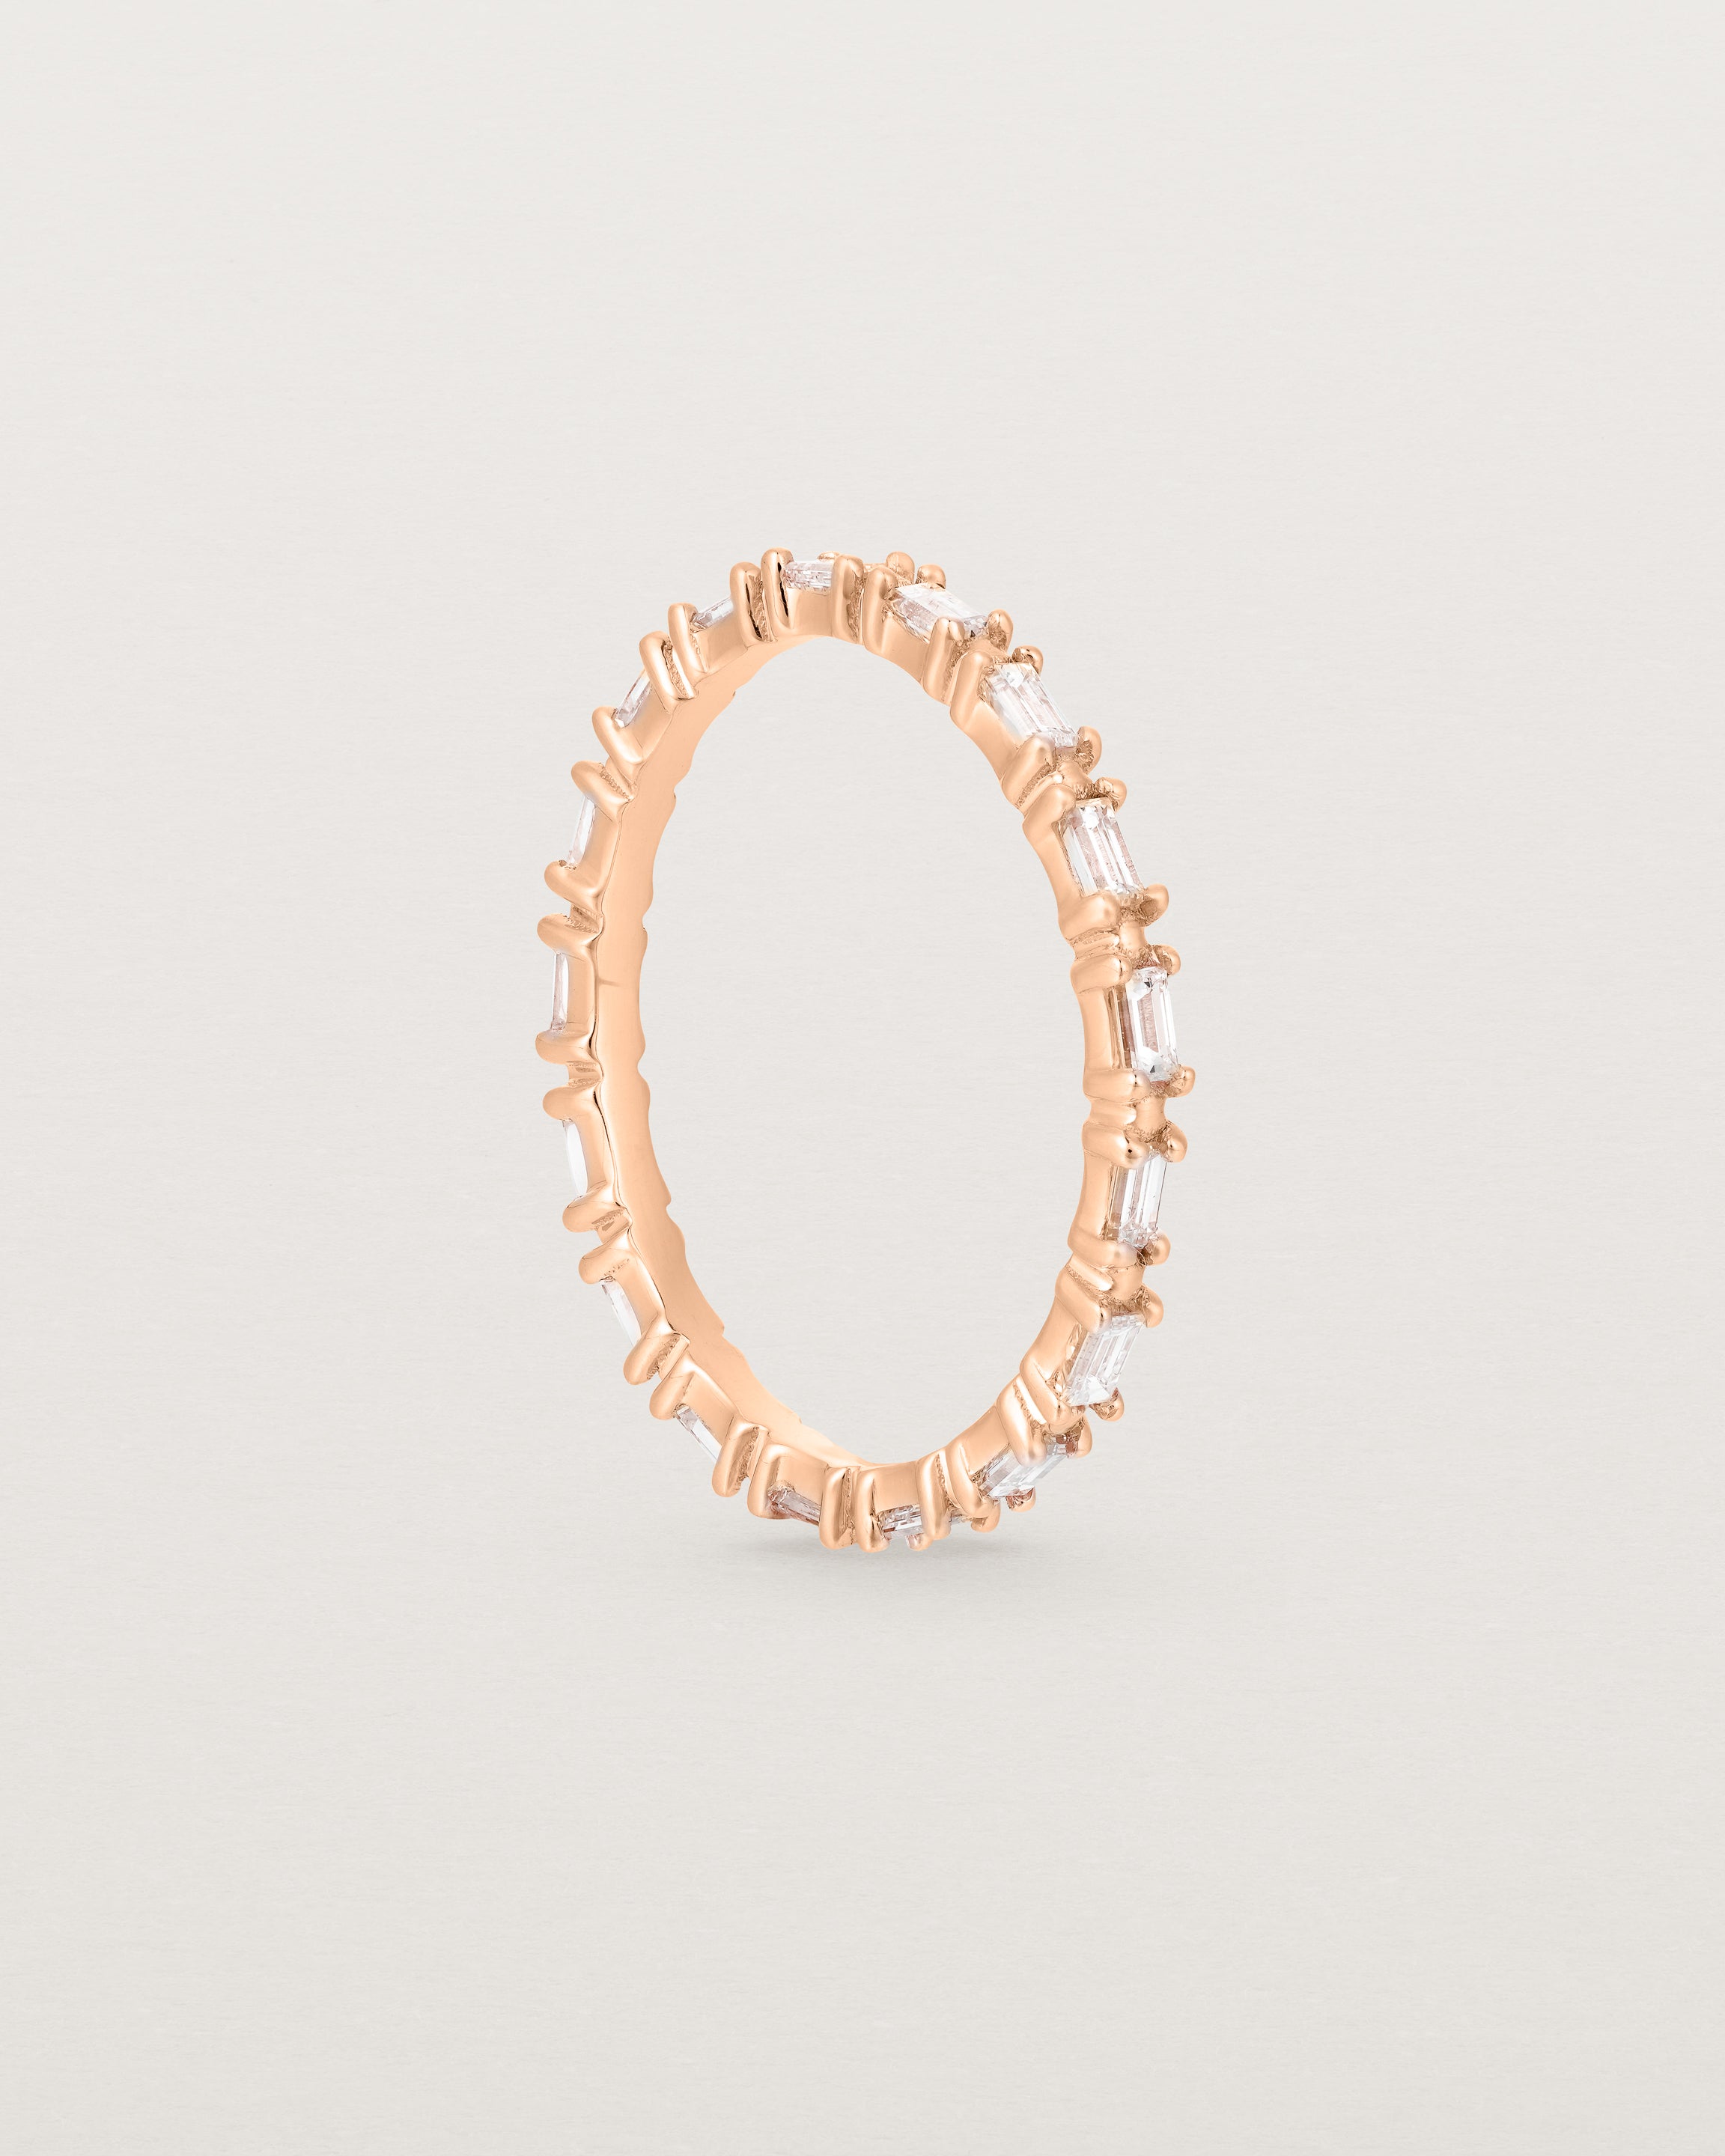 Standing view of the Khyati Ring | Diamonds in Rose Gold. 